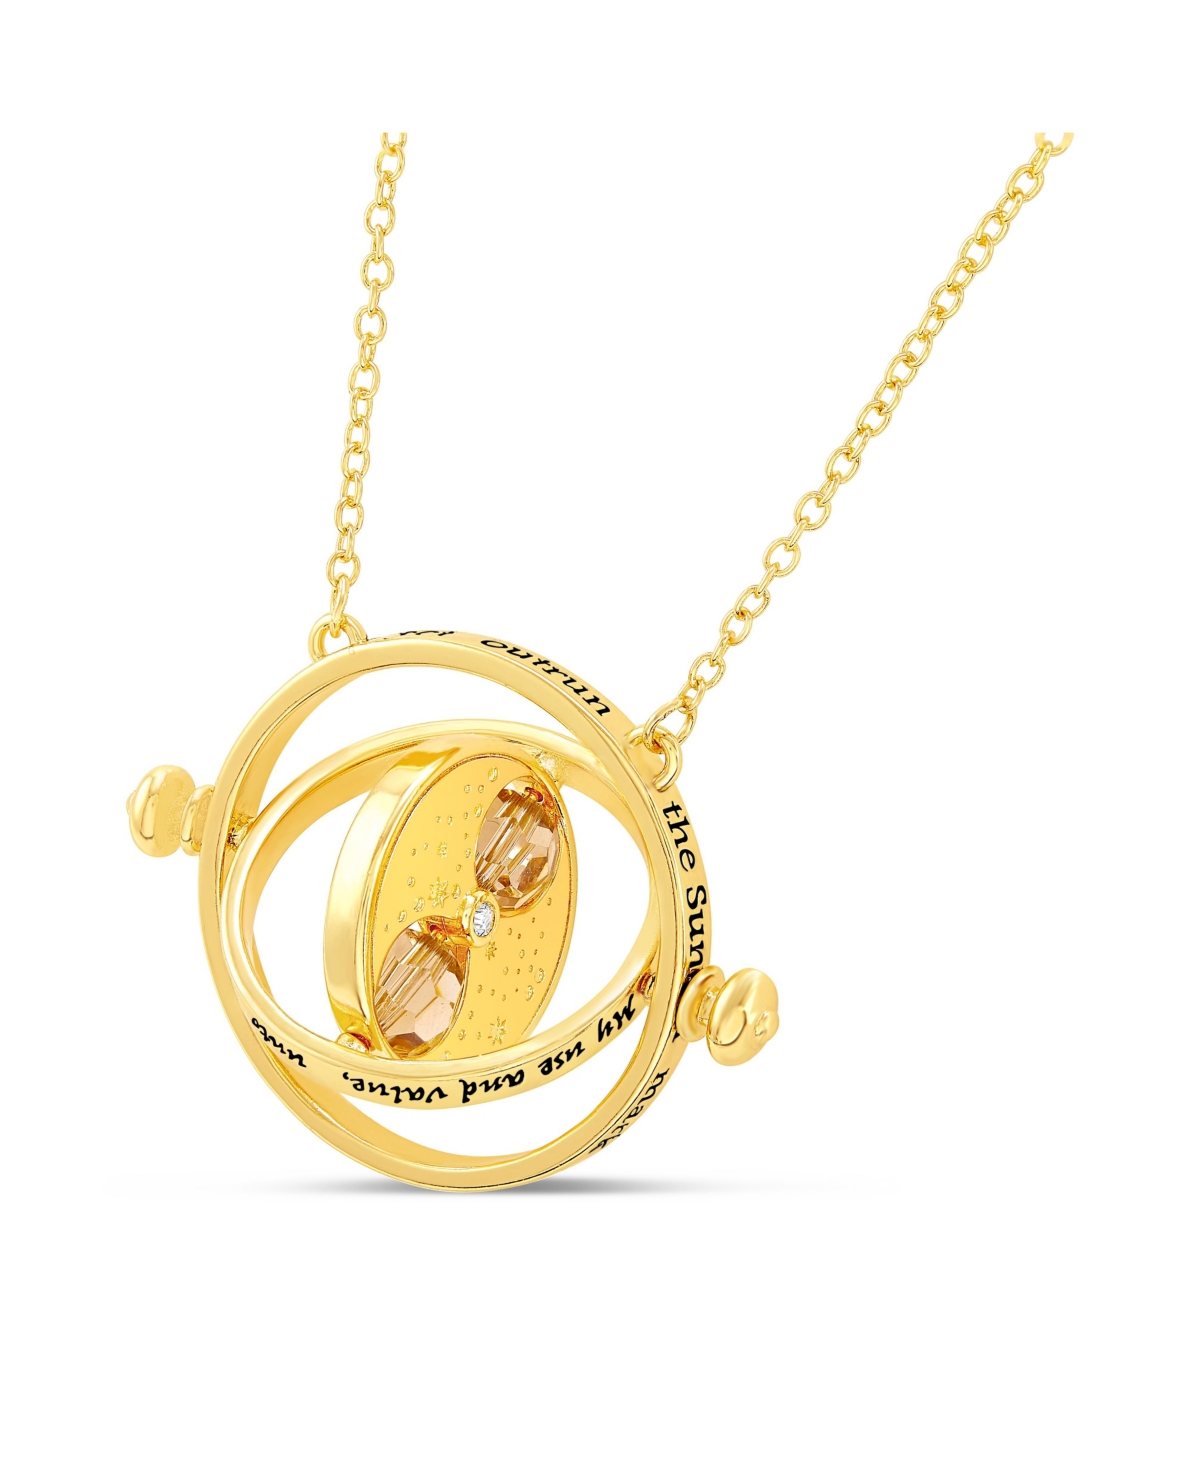 Hermione Time Travel Magical Hourglass Rotating Gold Plated Necklace, 22" - Gold tone